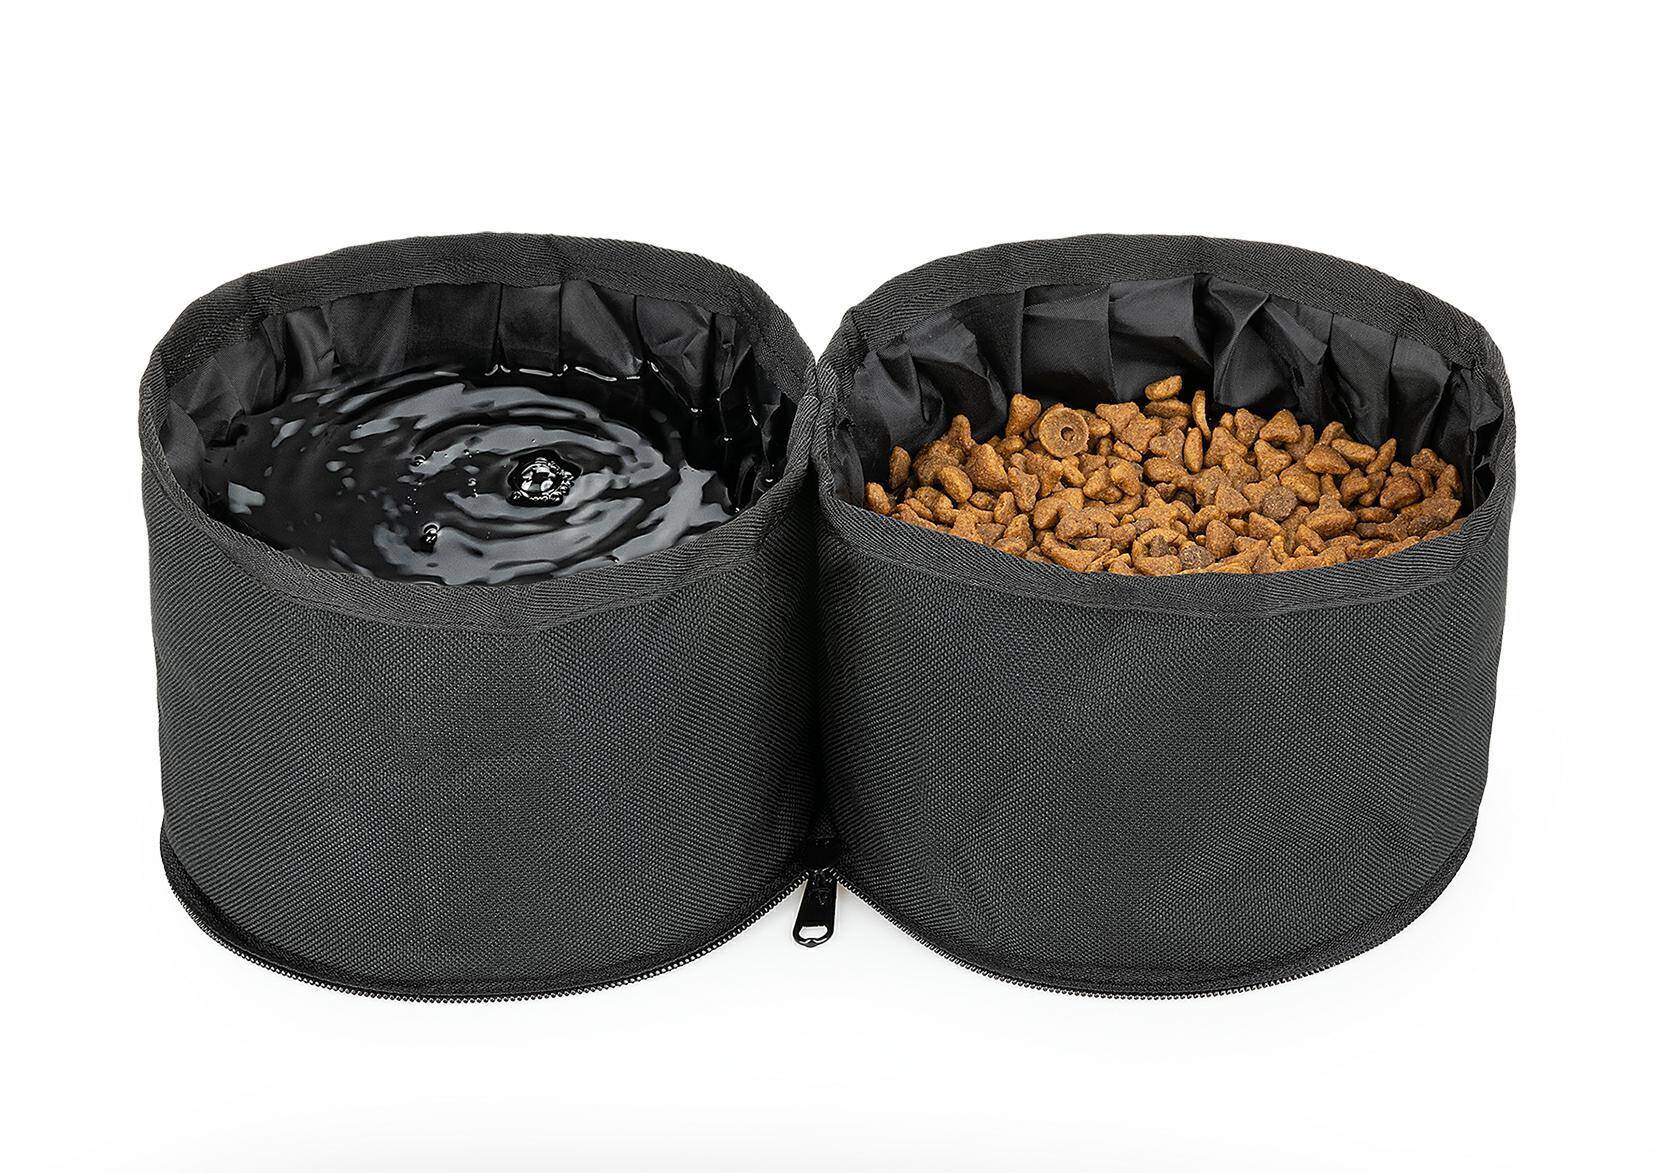 Collapsible Travel Bowls